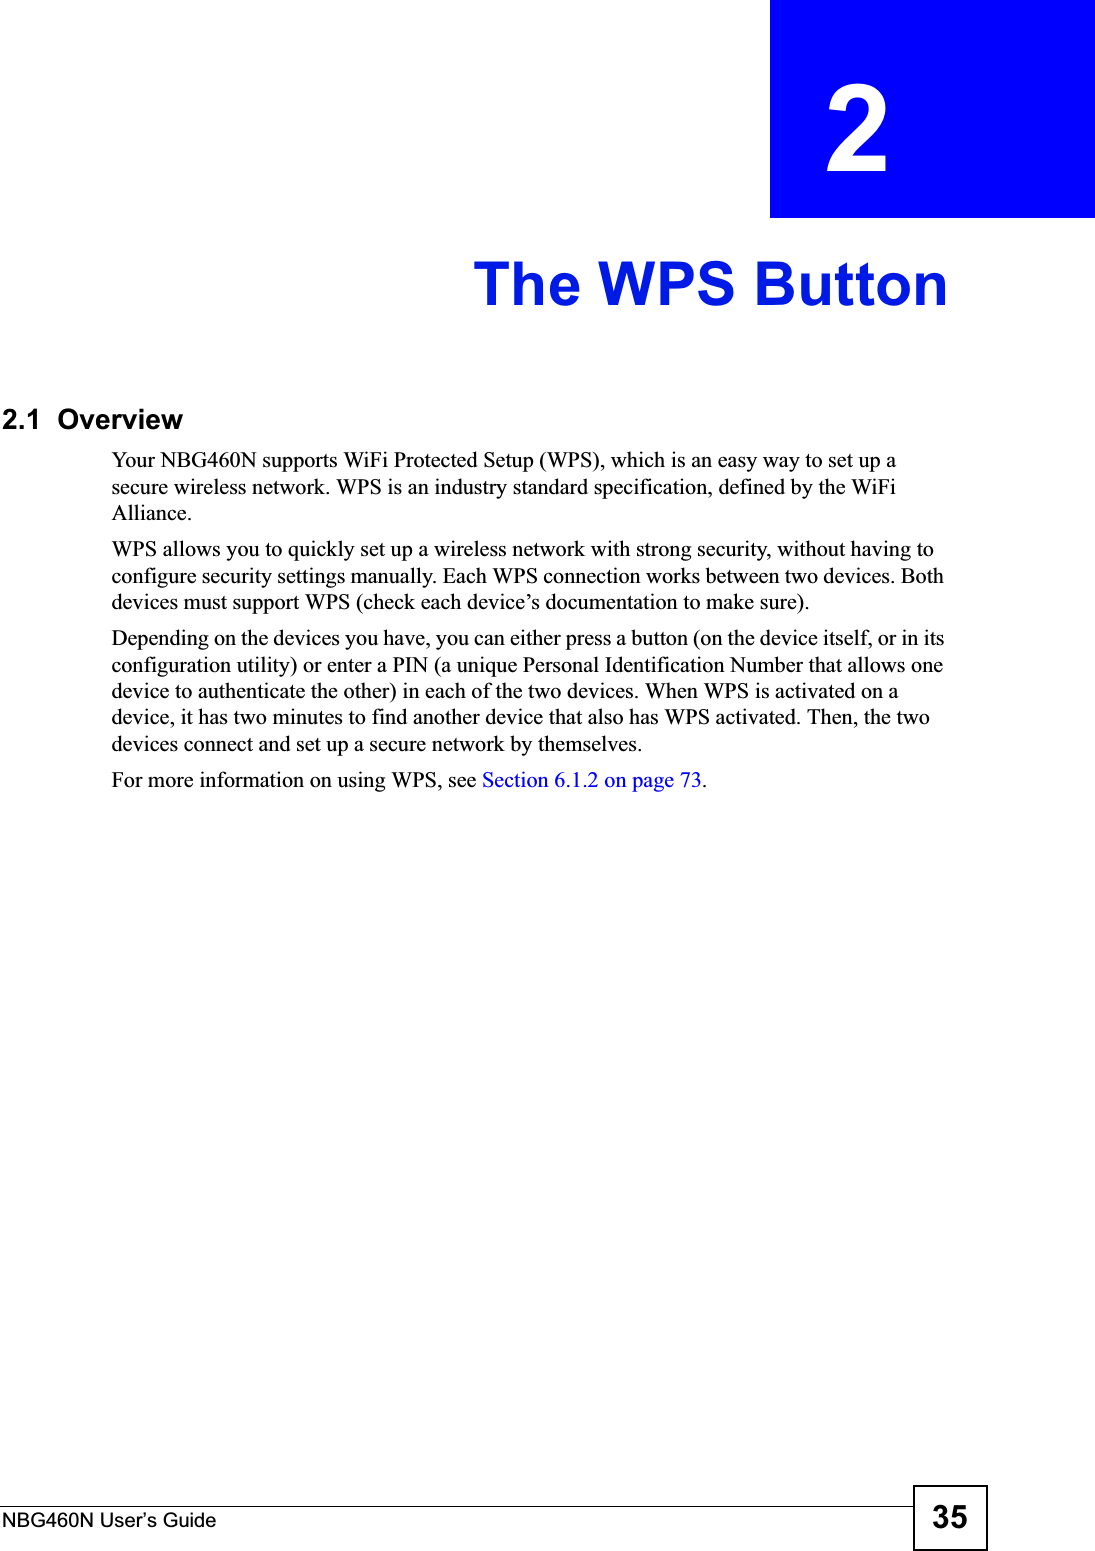 NBG460N User’s Guide 35CHAPTER  2 The WPS Button2.1  OverviewYour NBG460N supports WiFi Protected Setup (WPS), which is an easy way to set up a secure wireless network. WPS is an industry standard specification, defined by the WiFi Alliance.WPS allows you to quickly set up a wireless network with strong security, without having to configure security settings manually. Each WPS connection works between two devices. Both devices must support WPS (check each device’s documentation to make sure). Depending on the devices you have, you can either press a button (on the device itself, or in its configuration utility) or enter a PIN (a unique Personal Identification Number that allows one device to authenticate the other) in each of the two devices. When WPS is activated on a device, it has two minutes to find another device that also has WPS activated. Then, the two devices connect and set up a secure network by themselves.For more information on using WPS, see Section 6.1.2 on page 73.